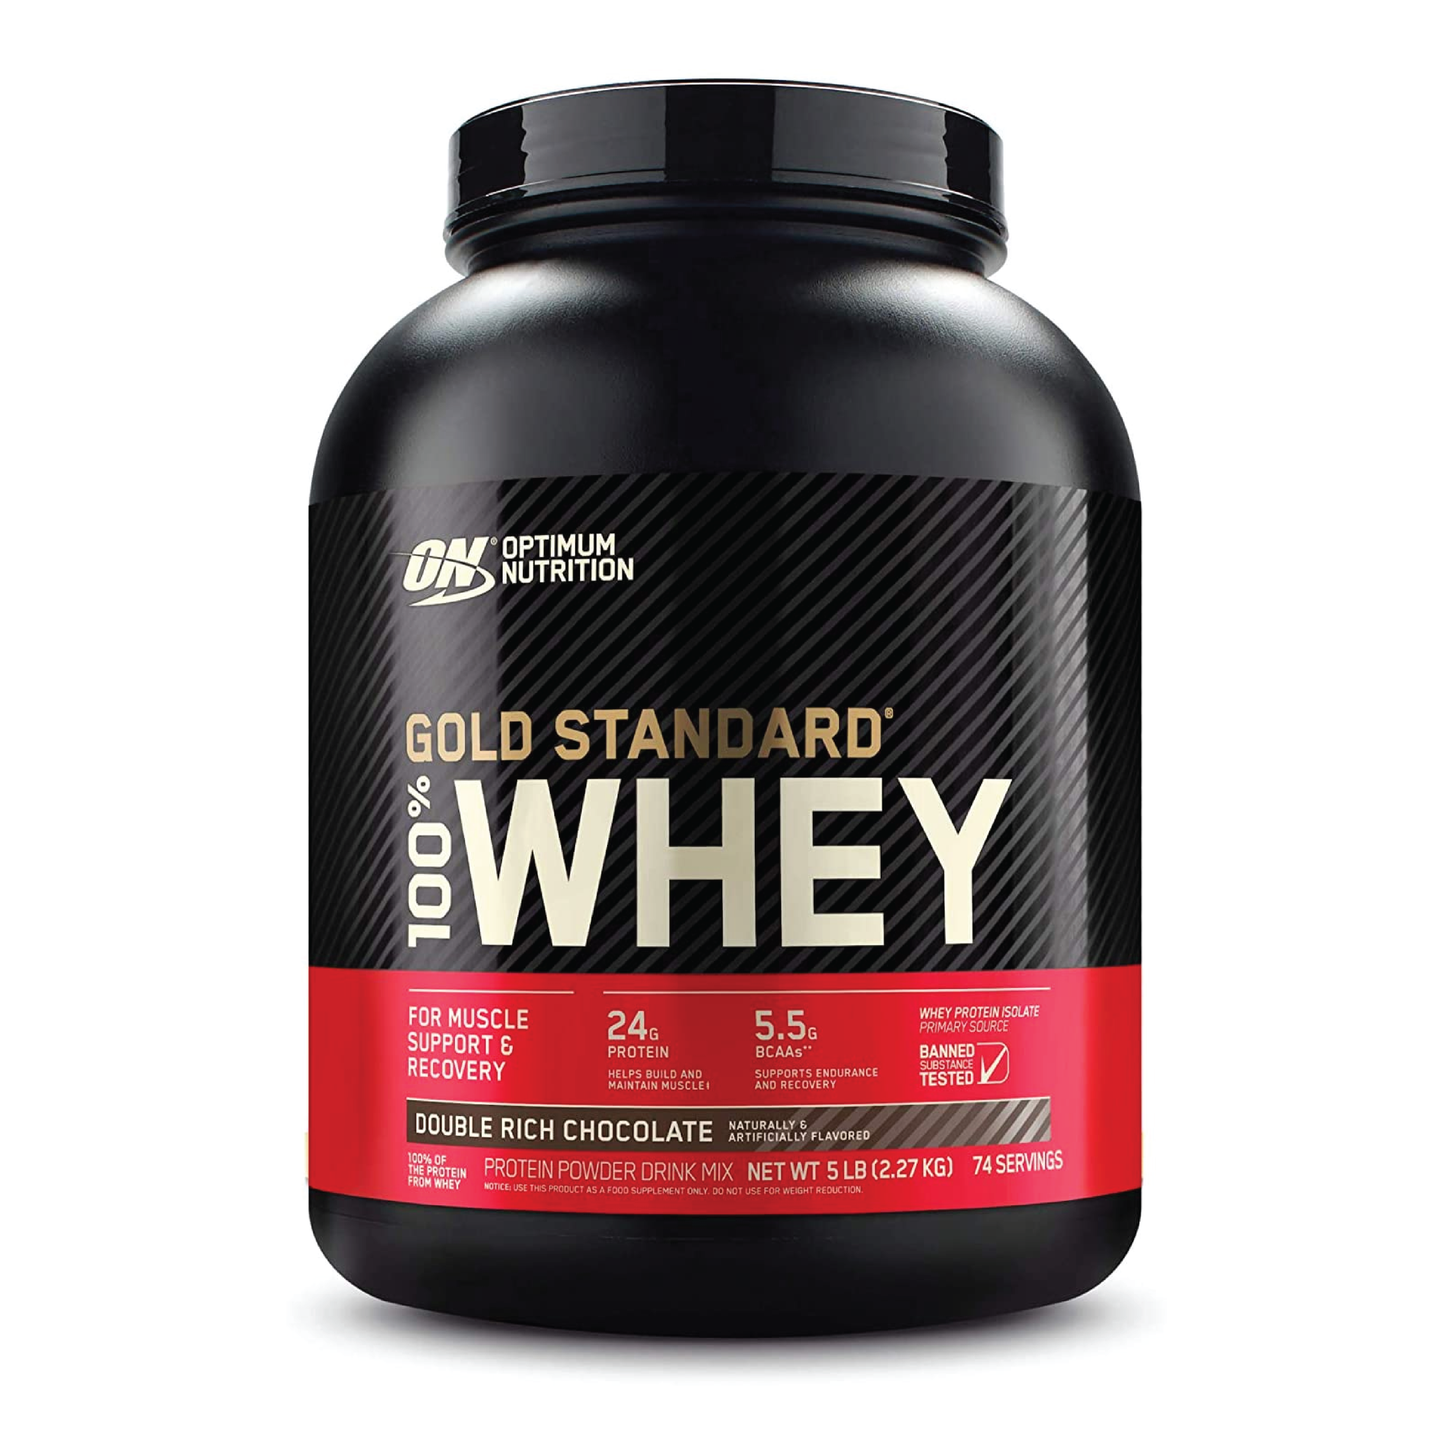 ON GOLD STANDARD 100% Whey Protein